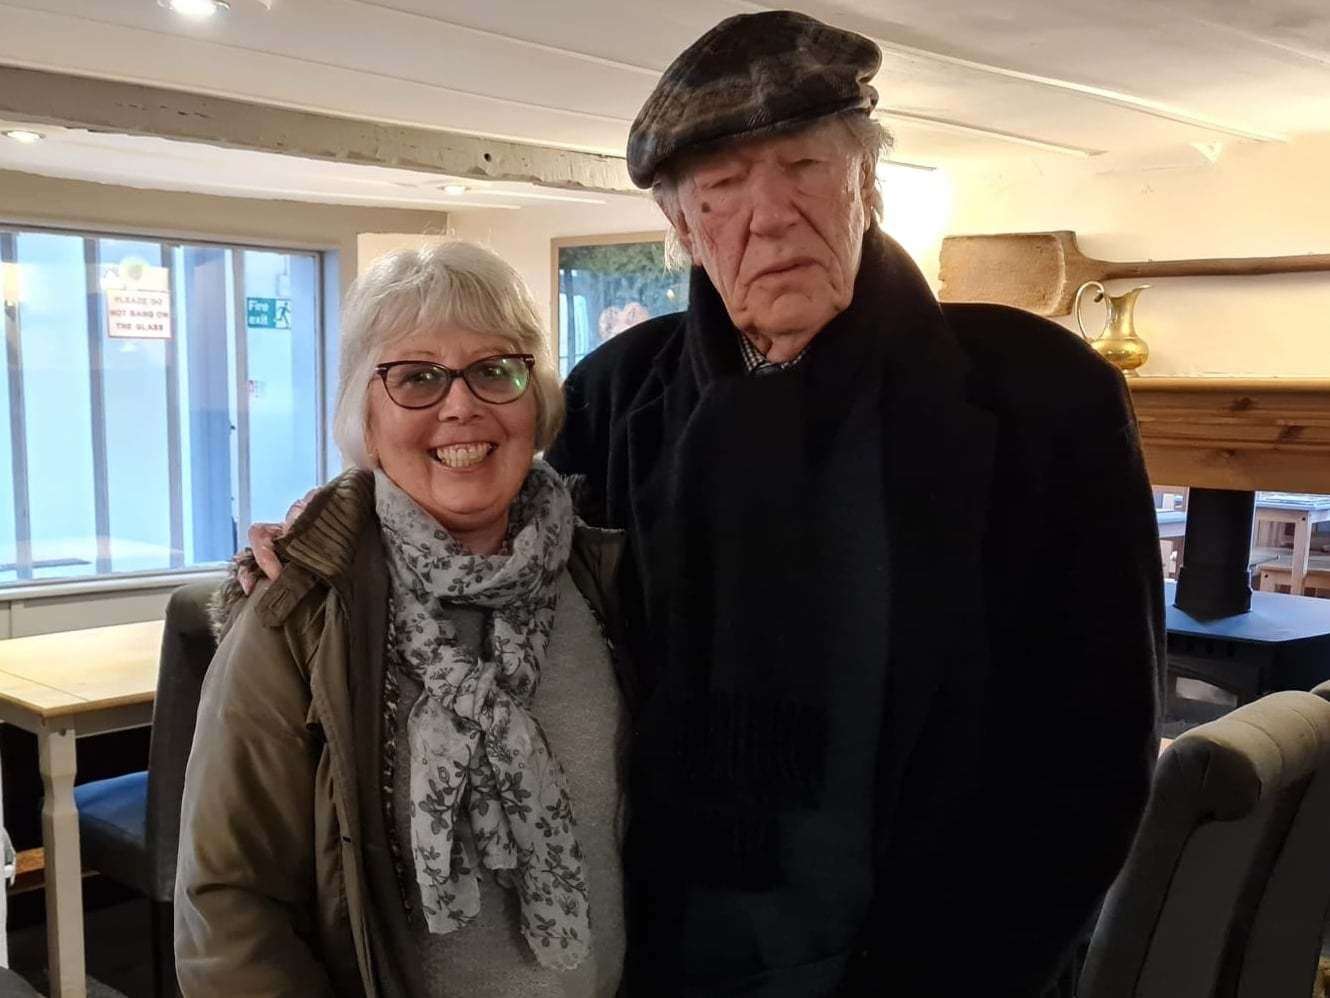 Michael Gambon fielded lots of questions about playing Dumbledore in the Harry Potter movies. Picture: The Fenn Bell Inn